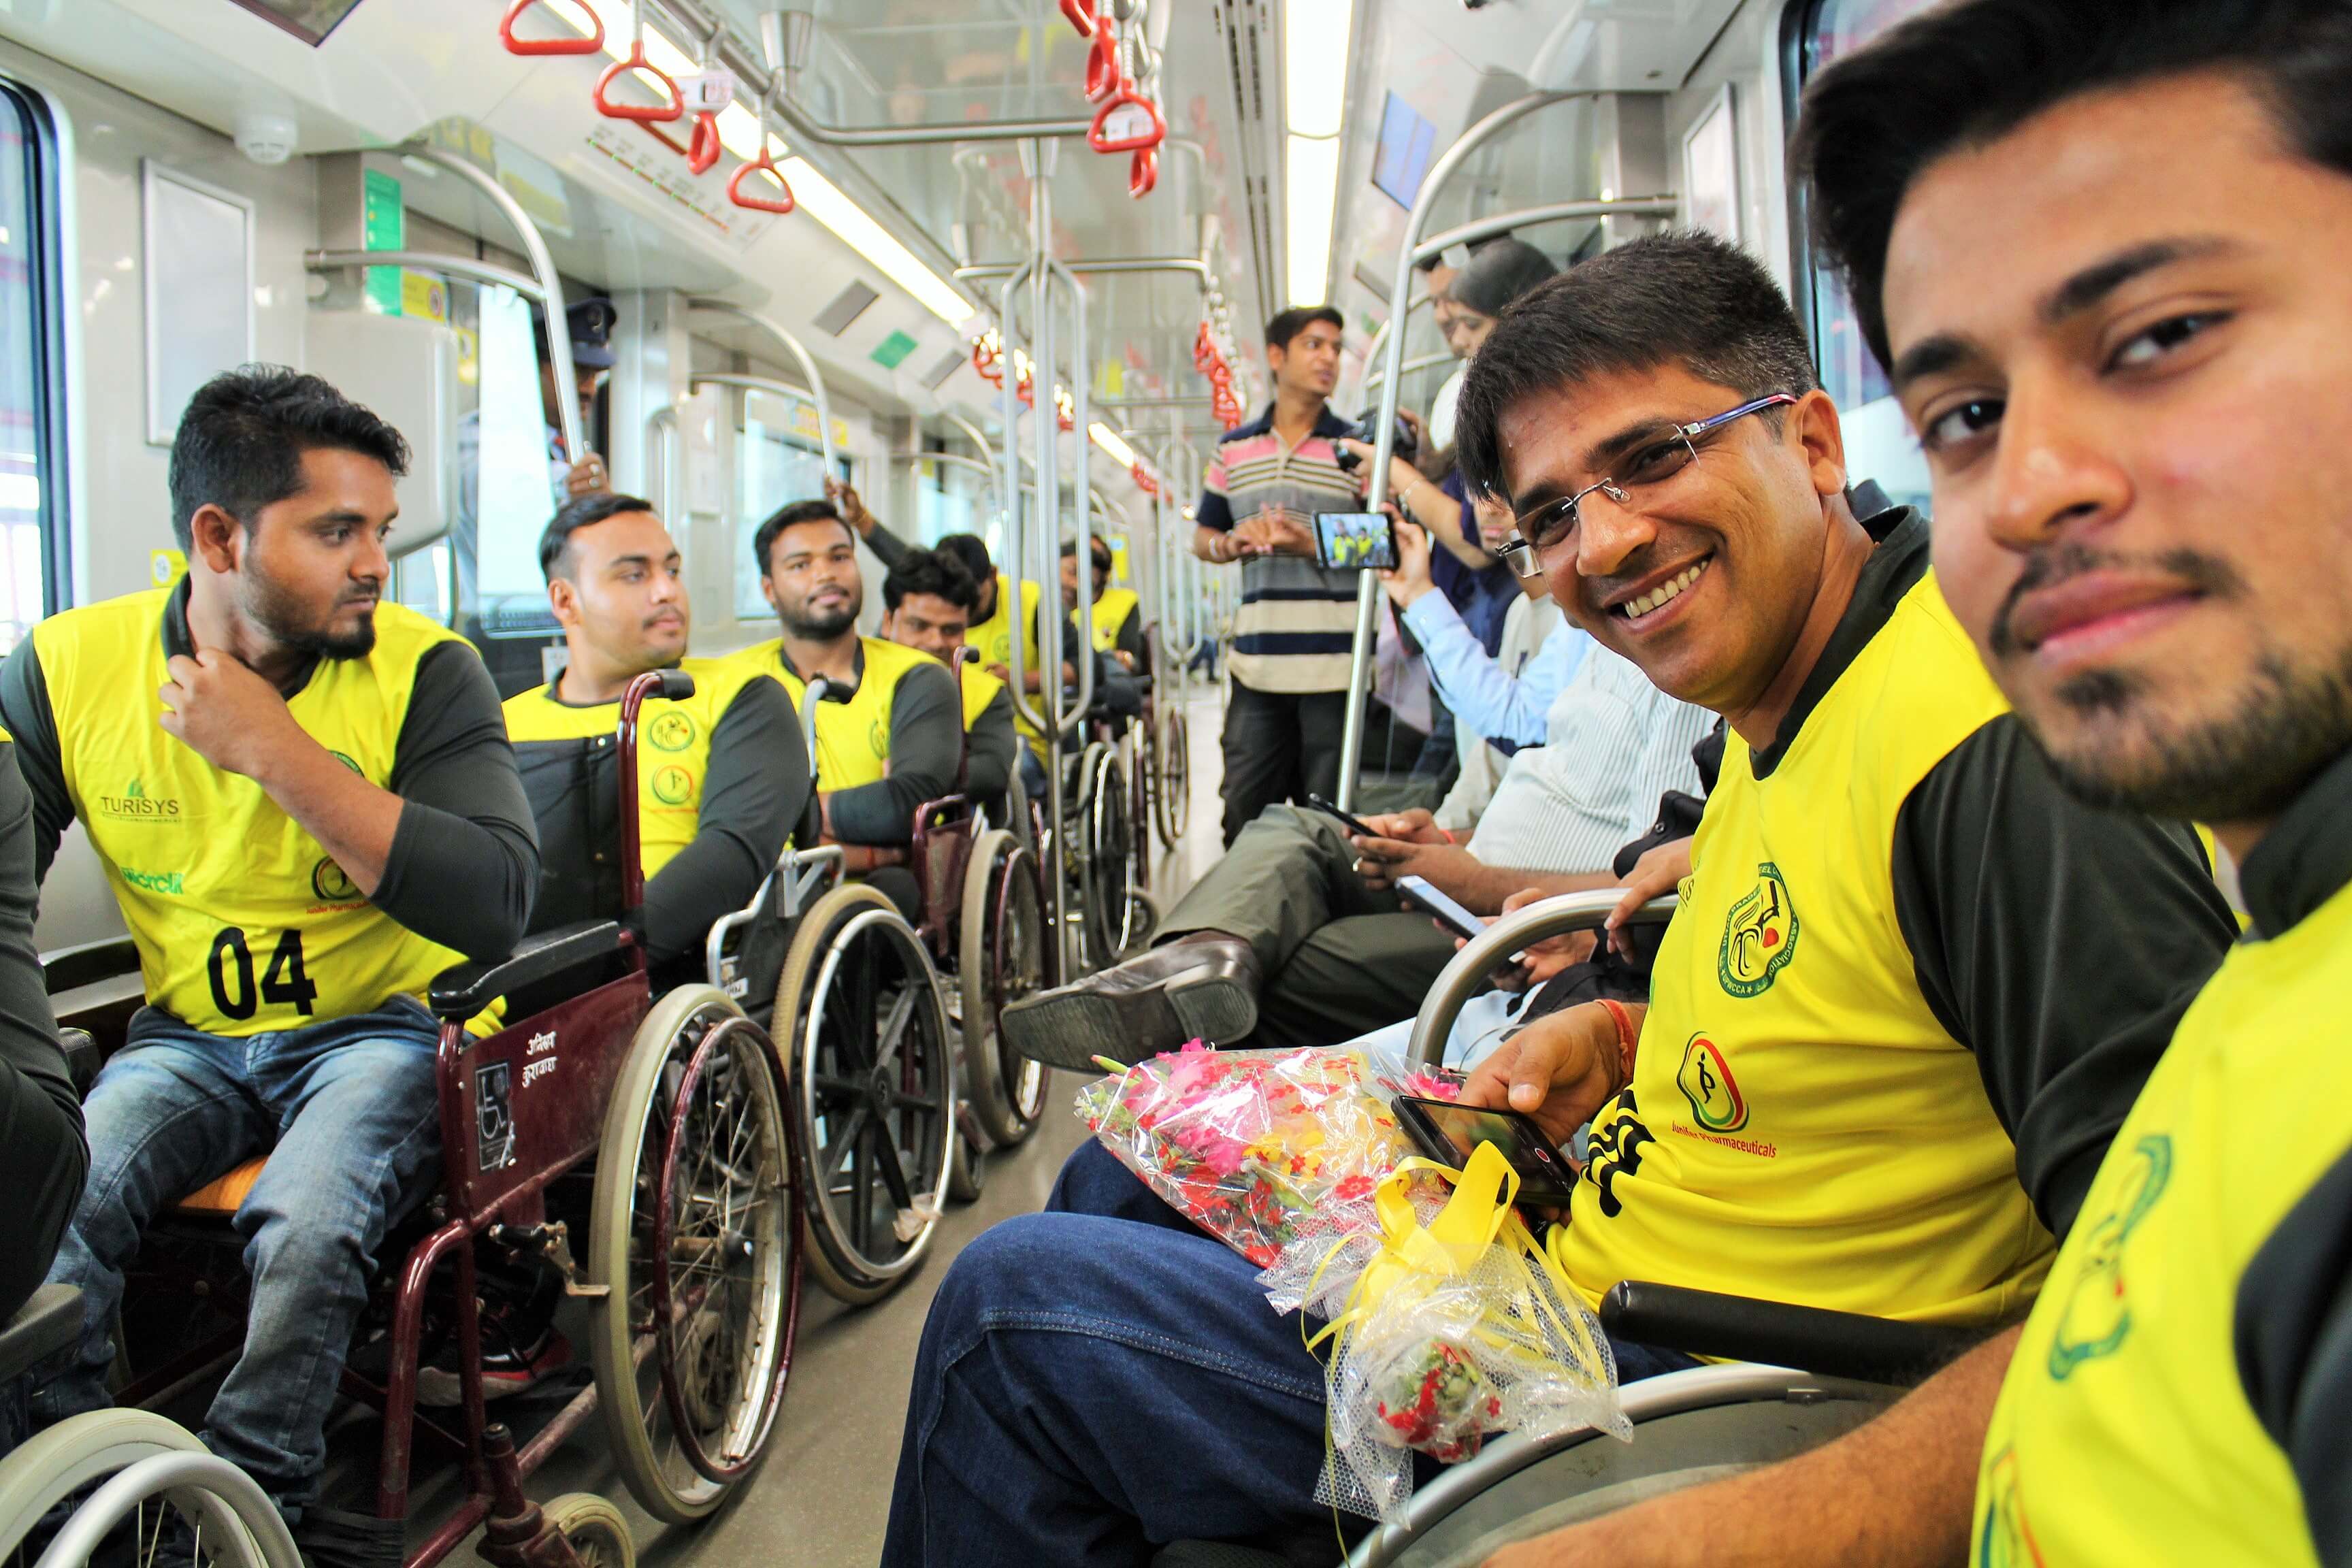 special Metro train ride for a team of para sports players (wheelchair players)-7